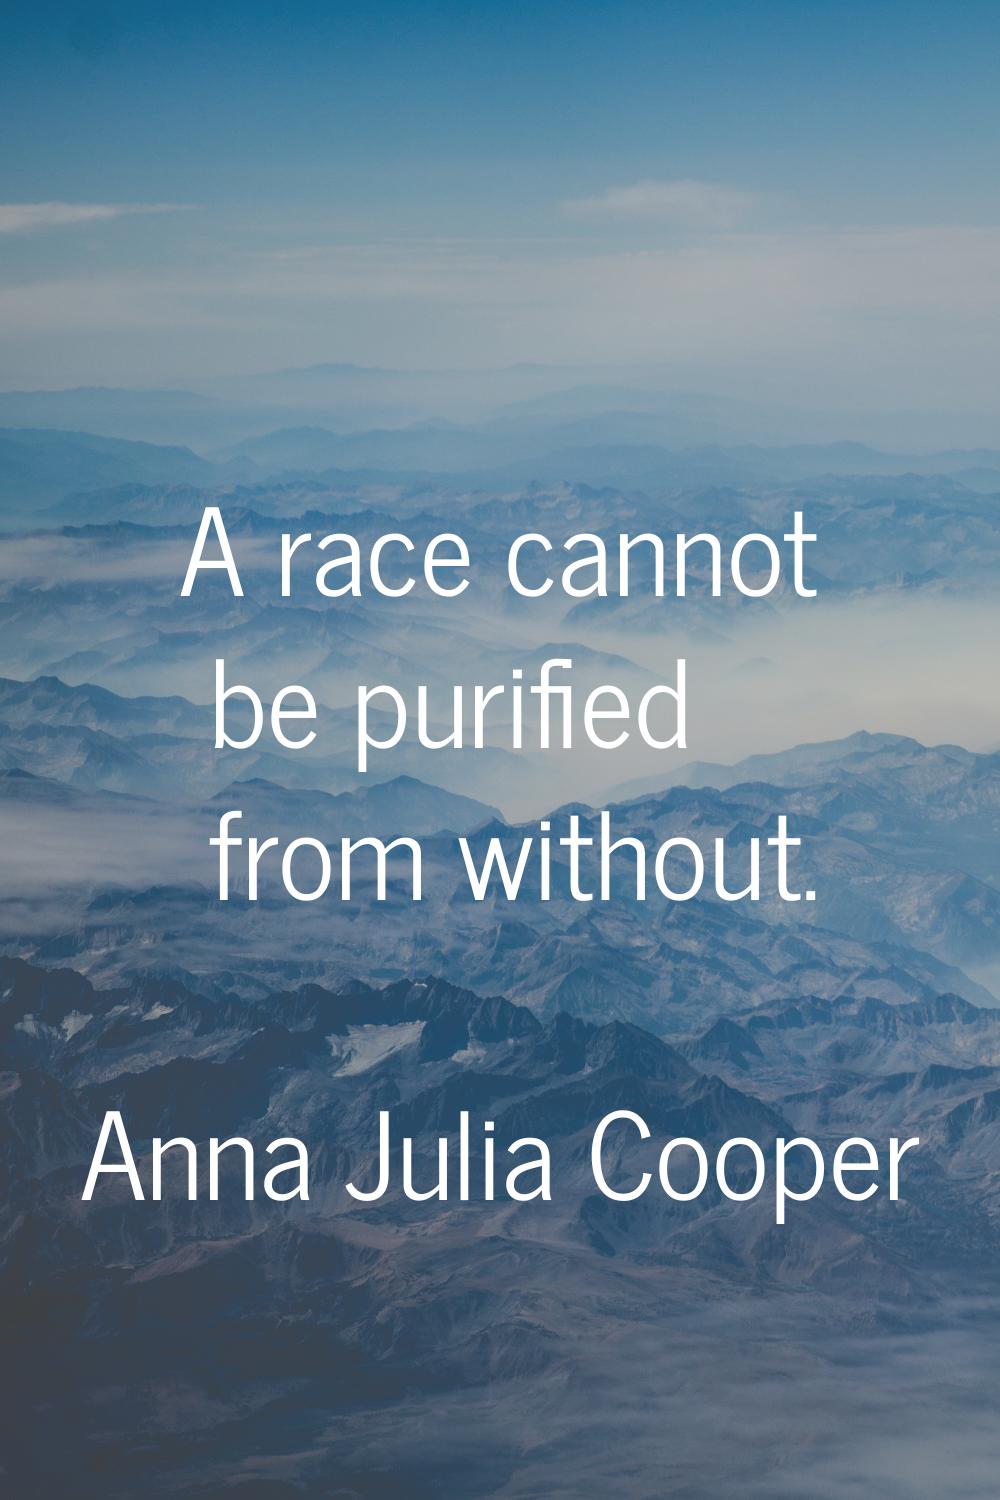 A race cannot be purified from without.